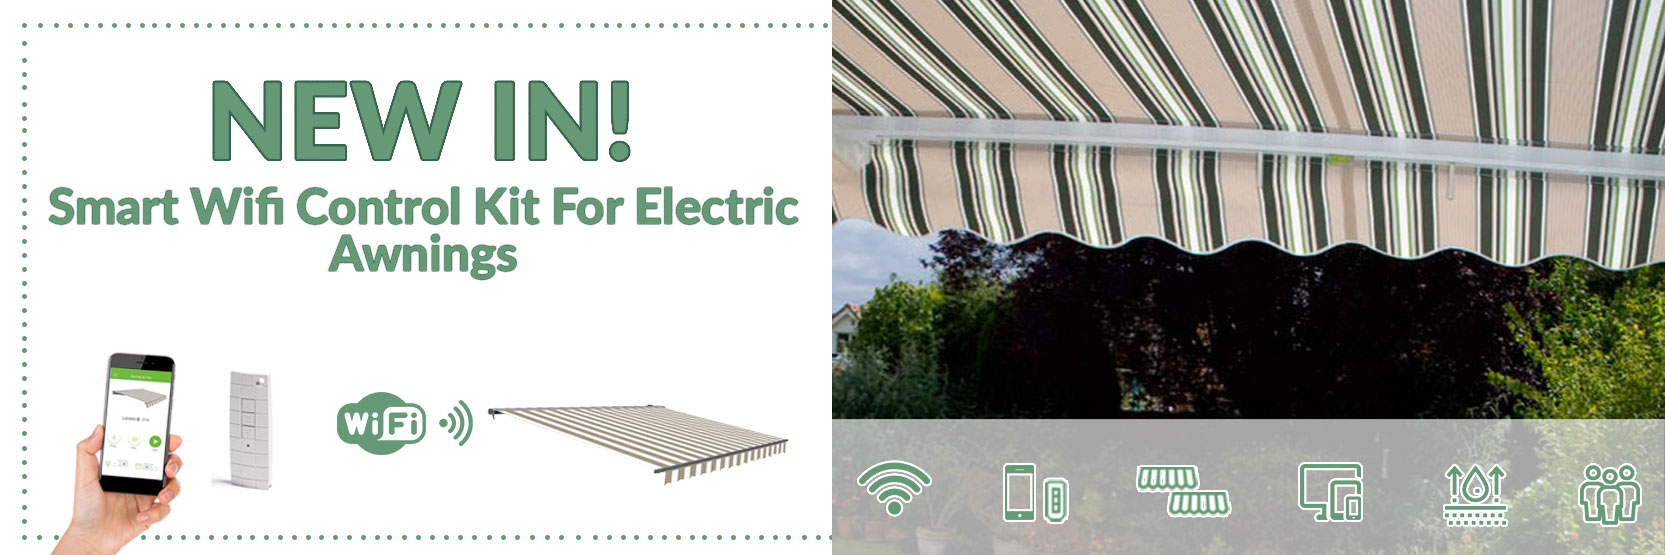 Smart WiFi Control Kit for Electric Awnings